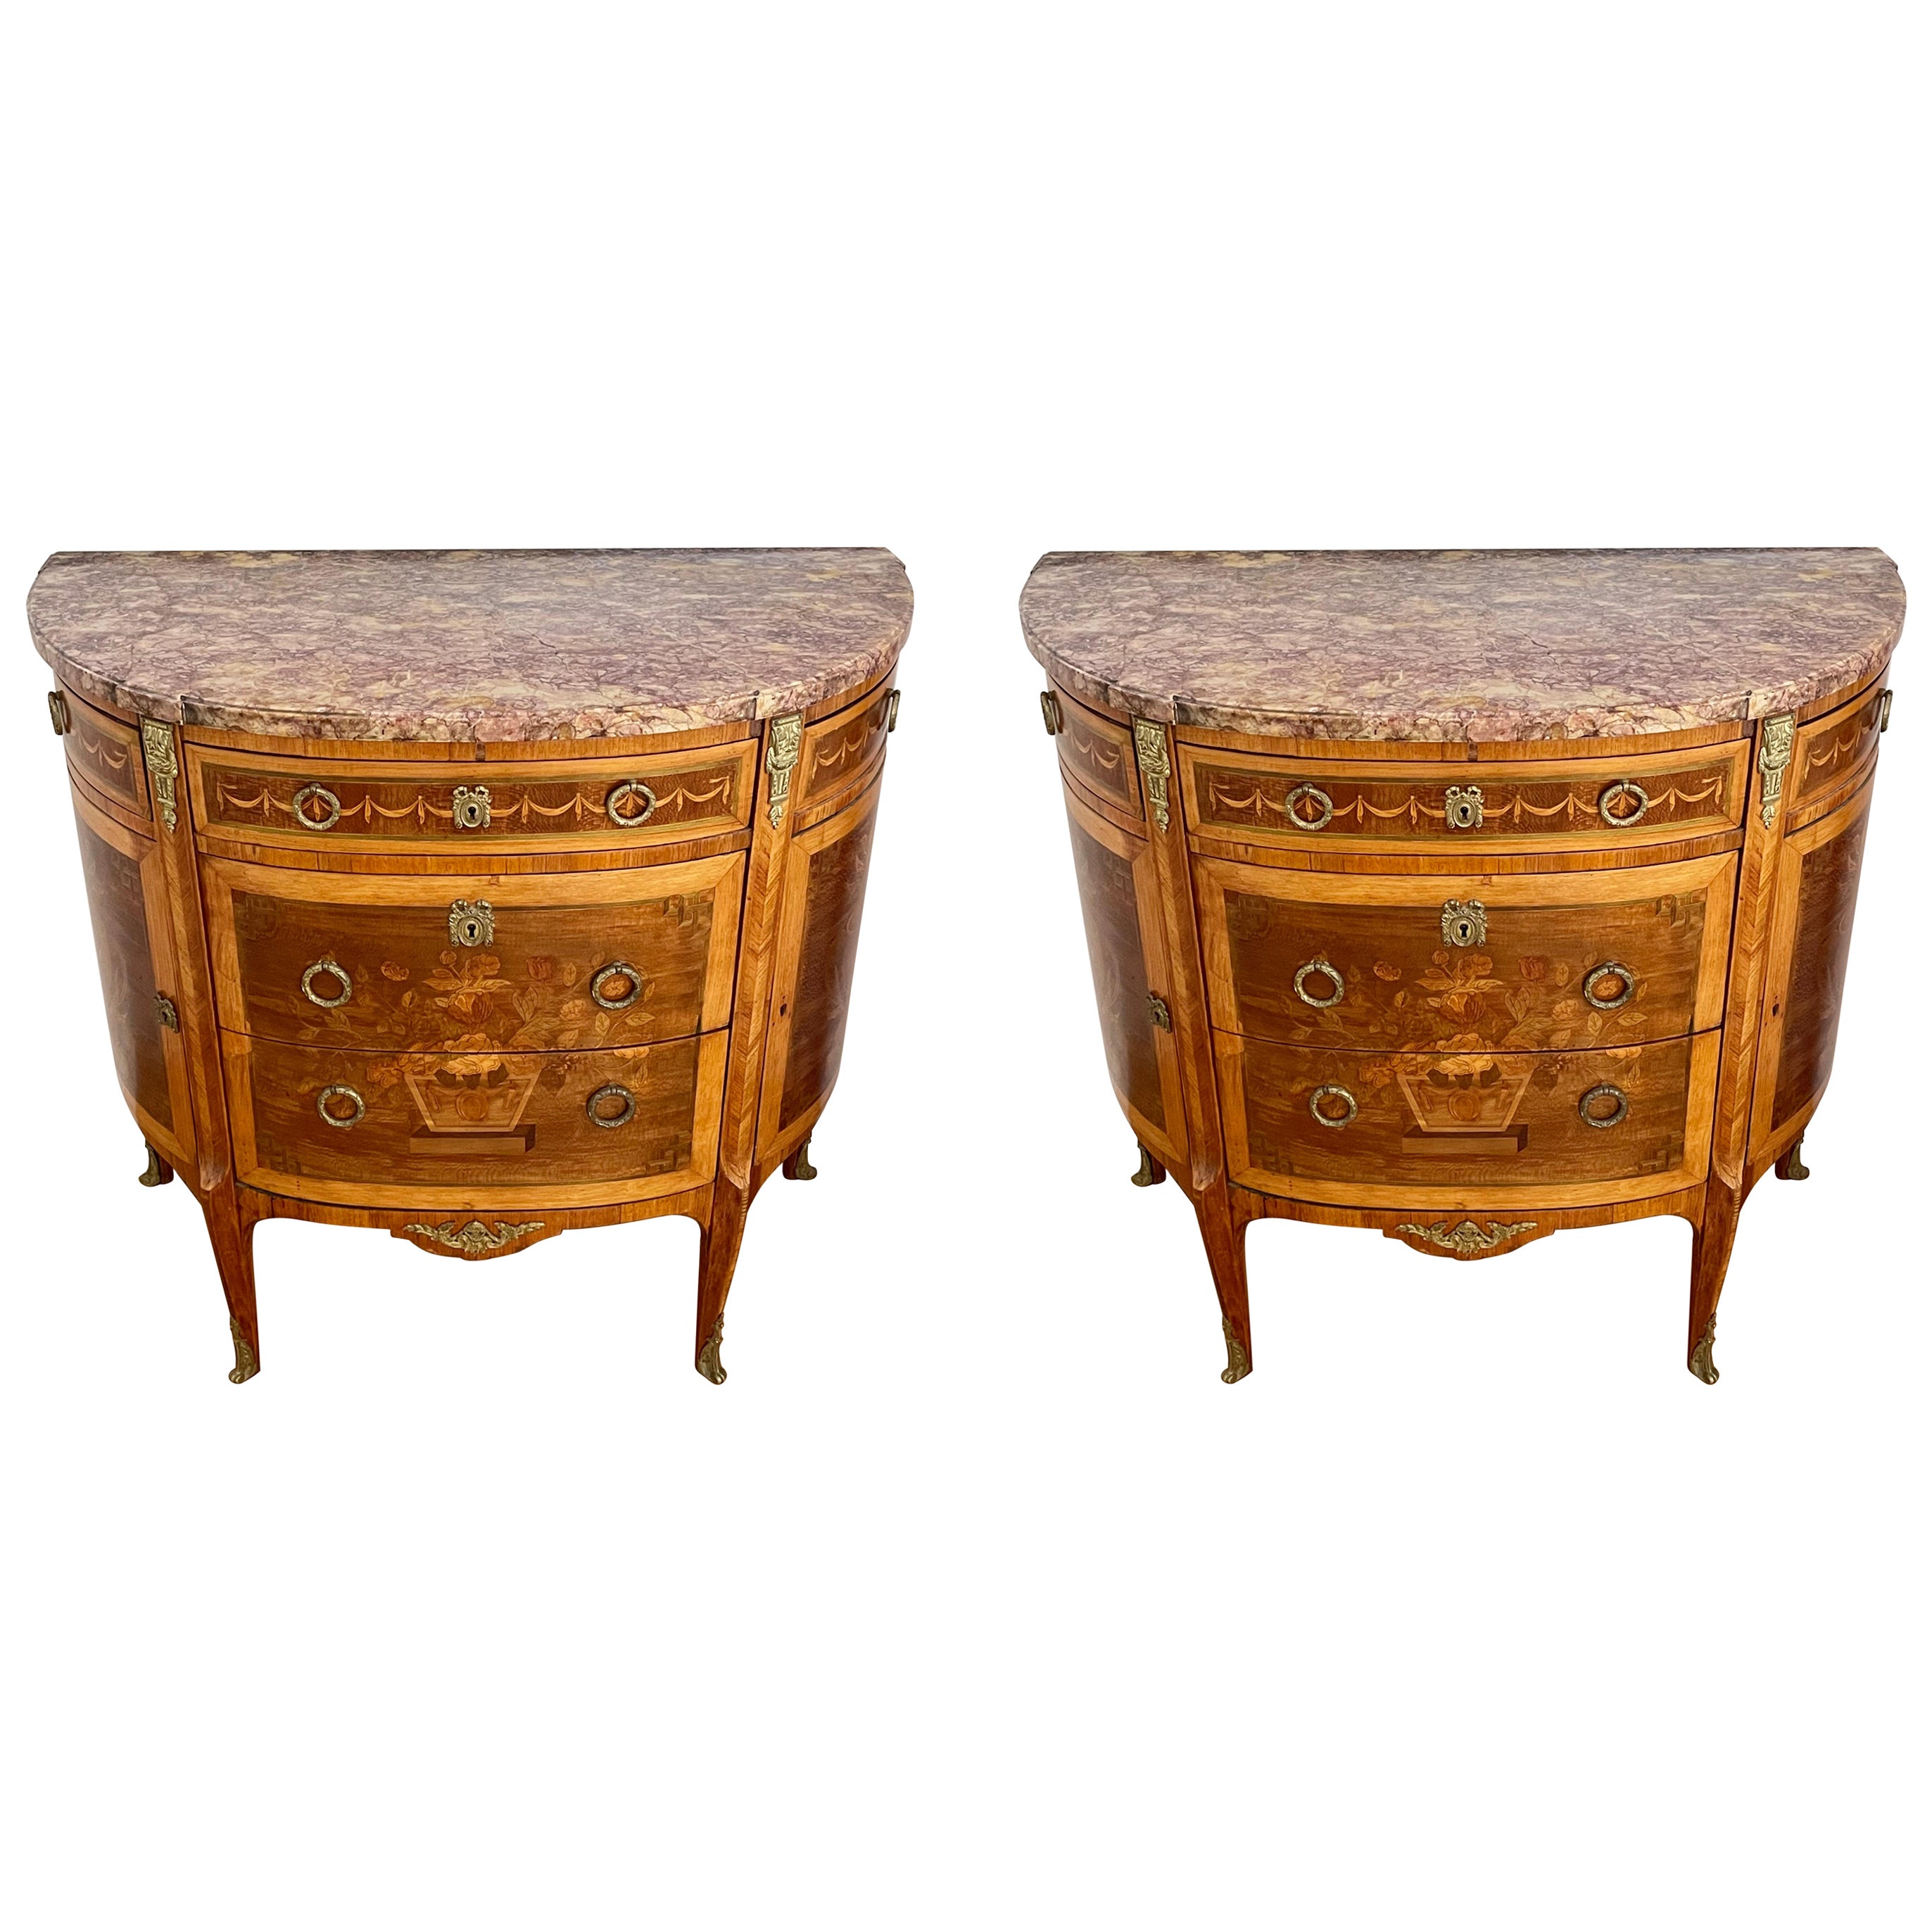 Pair of Neoclassical Kingwood Demi-Lune Commodes For Sale